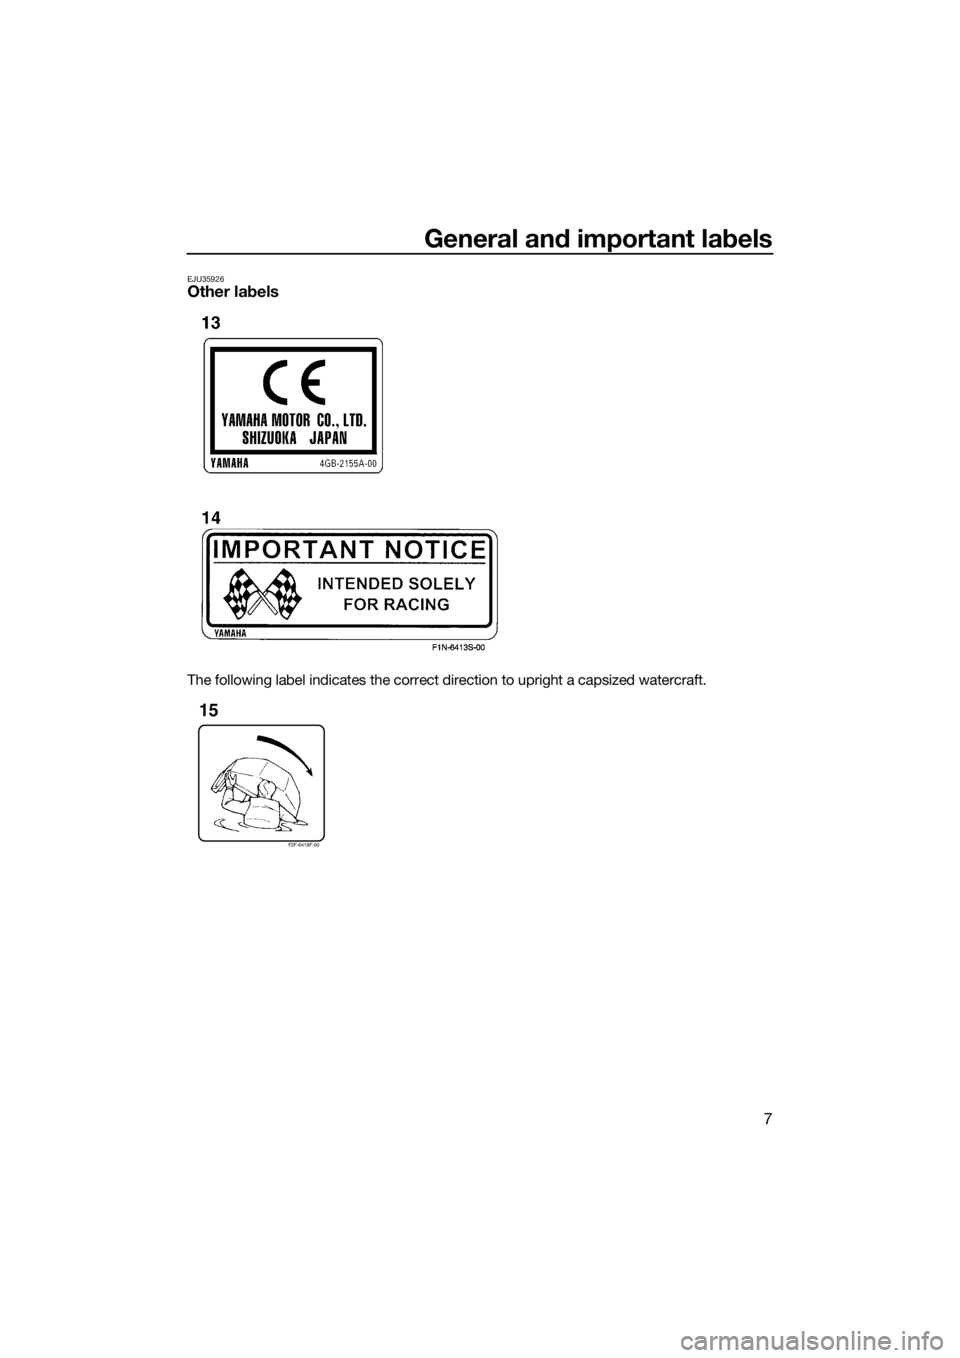 YAMAHA SUPERJET 2015 User Guide General and important labels
7
EJU35926Other labels
The following label indicates the correct direction to upright a capsized watercraft.
F2F-6418F-00
15
UF4D70E0.book  Page 7  Wednesday, May 7, 2014 